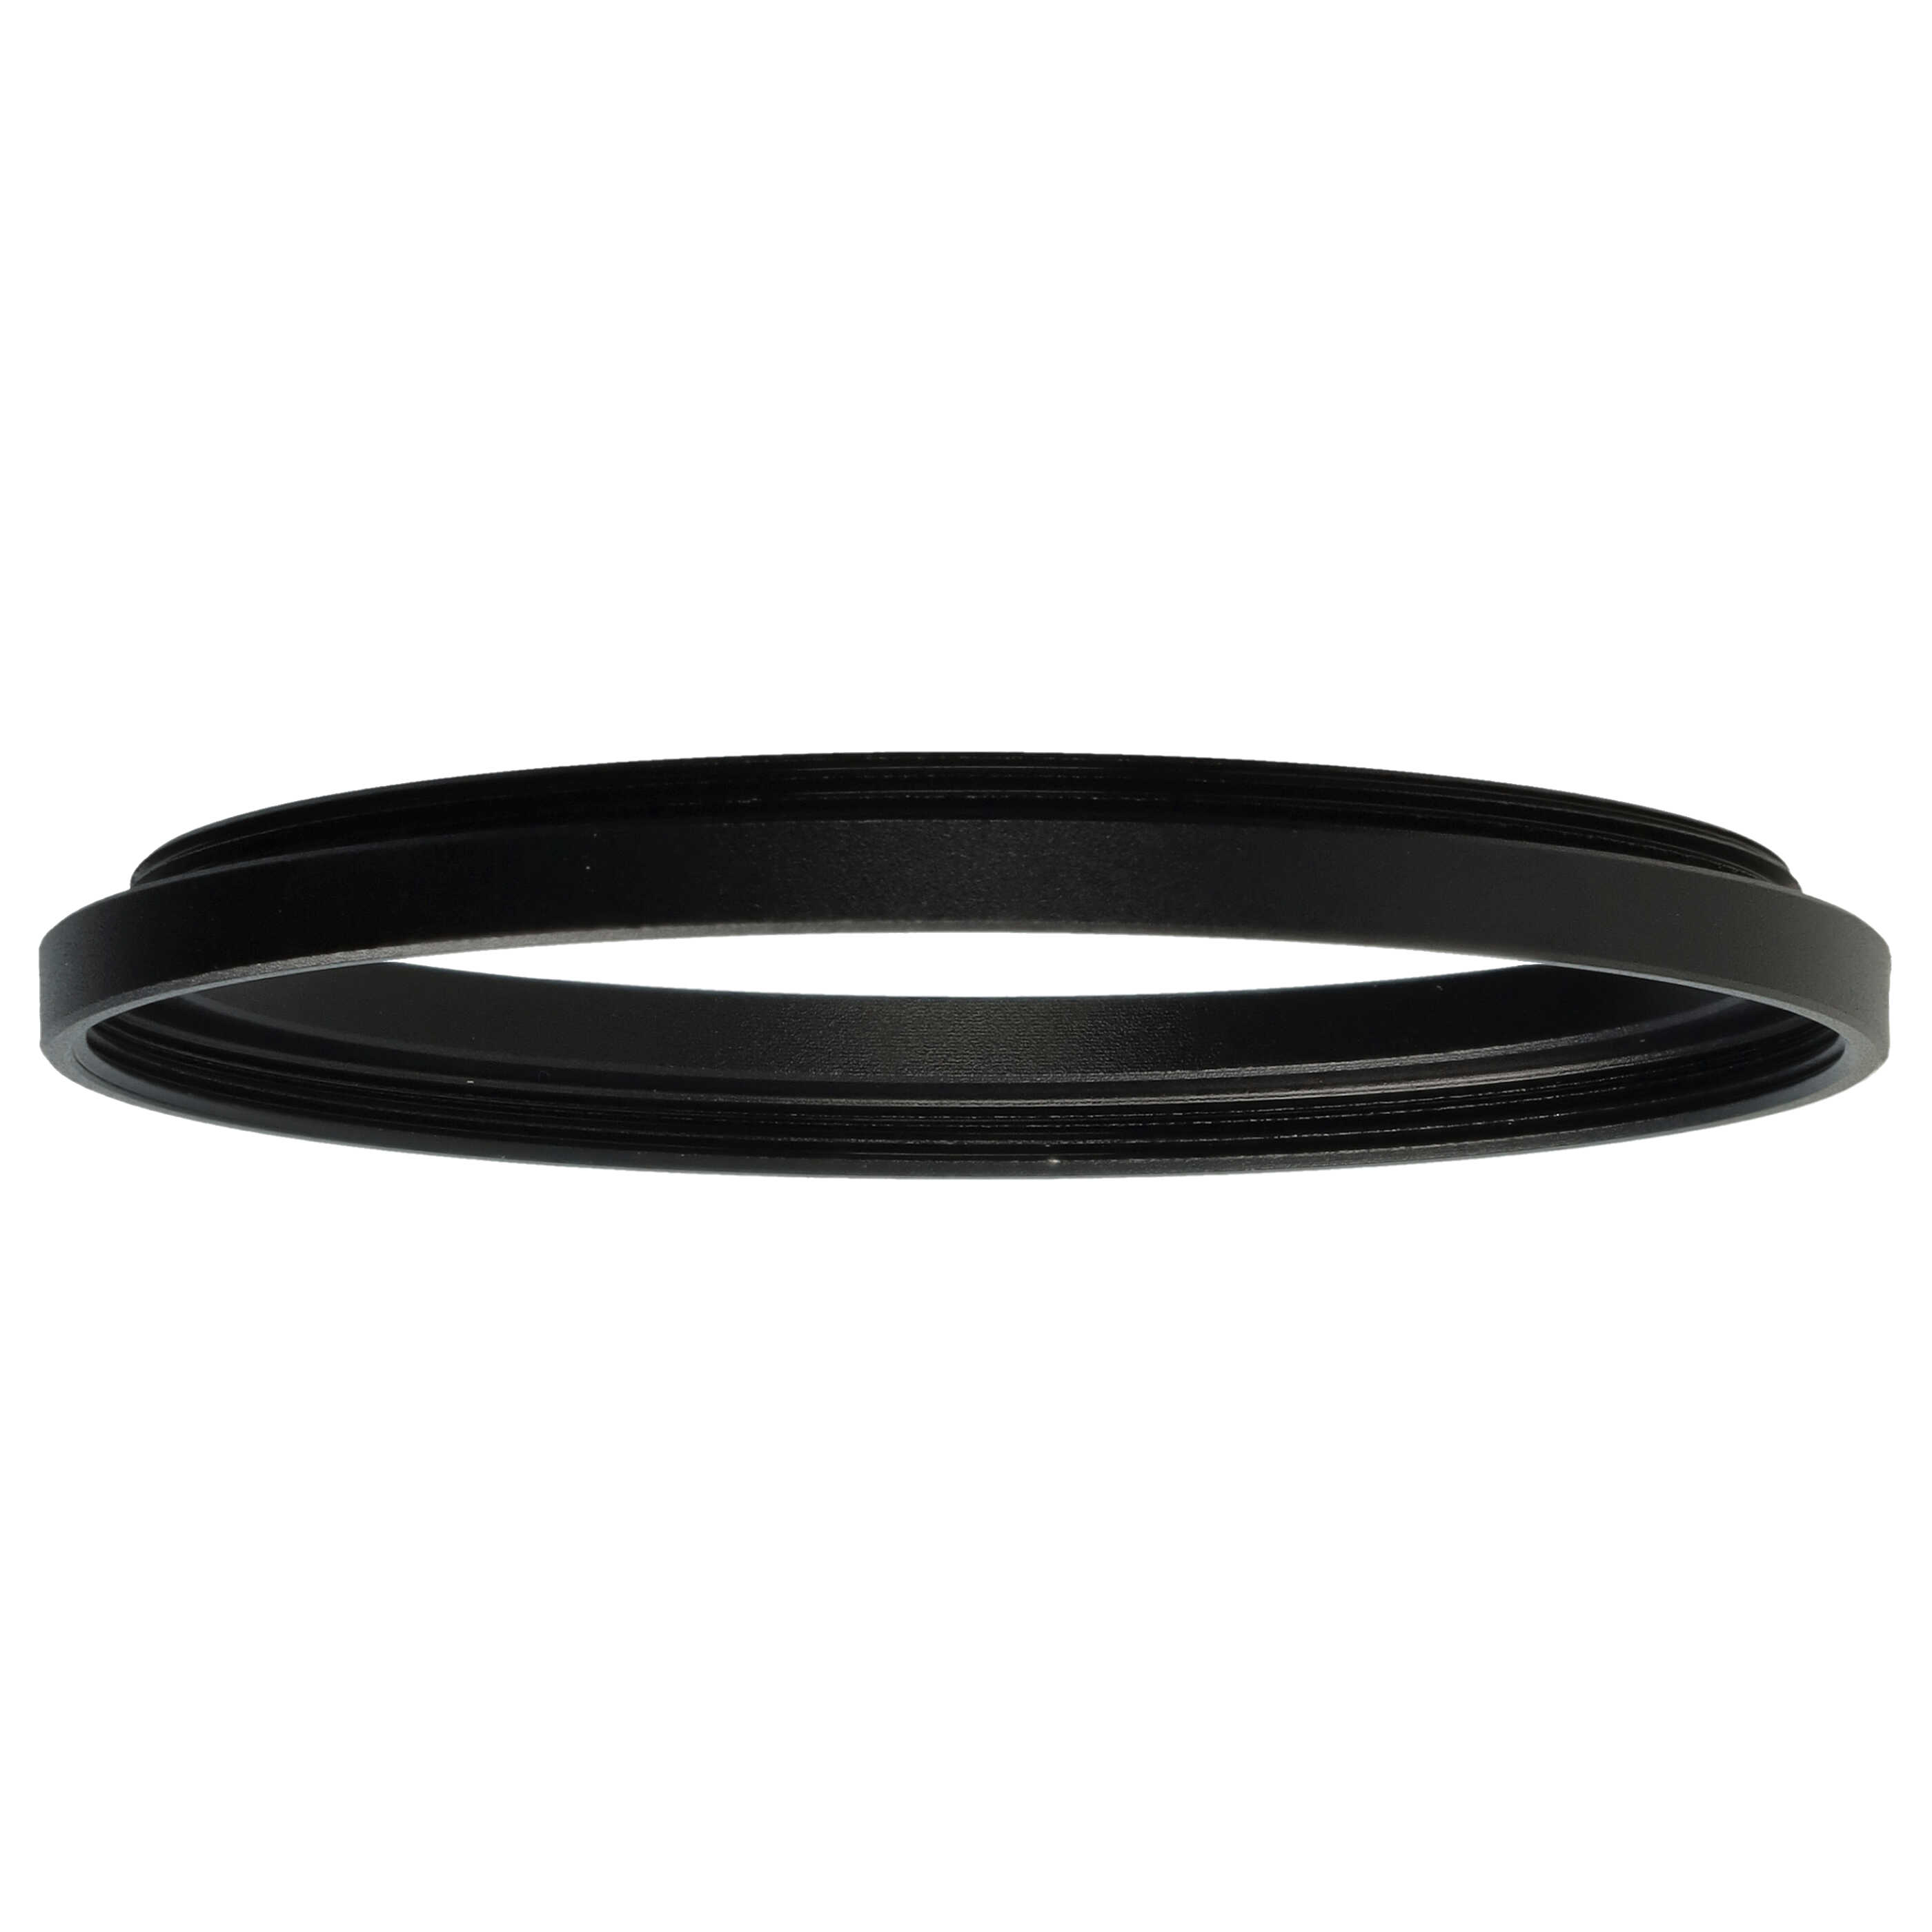 Step-Up Ring Adapter of 55 mm to 58 mmfor various Camera Lens - Filter Adapter